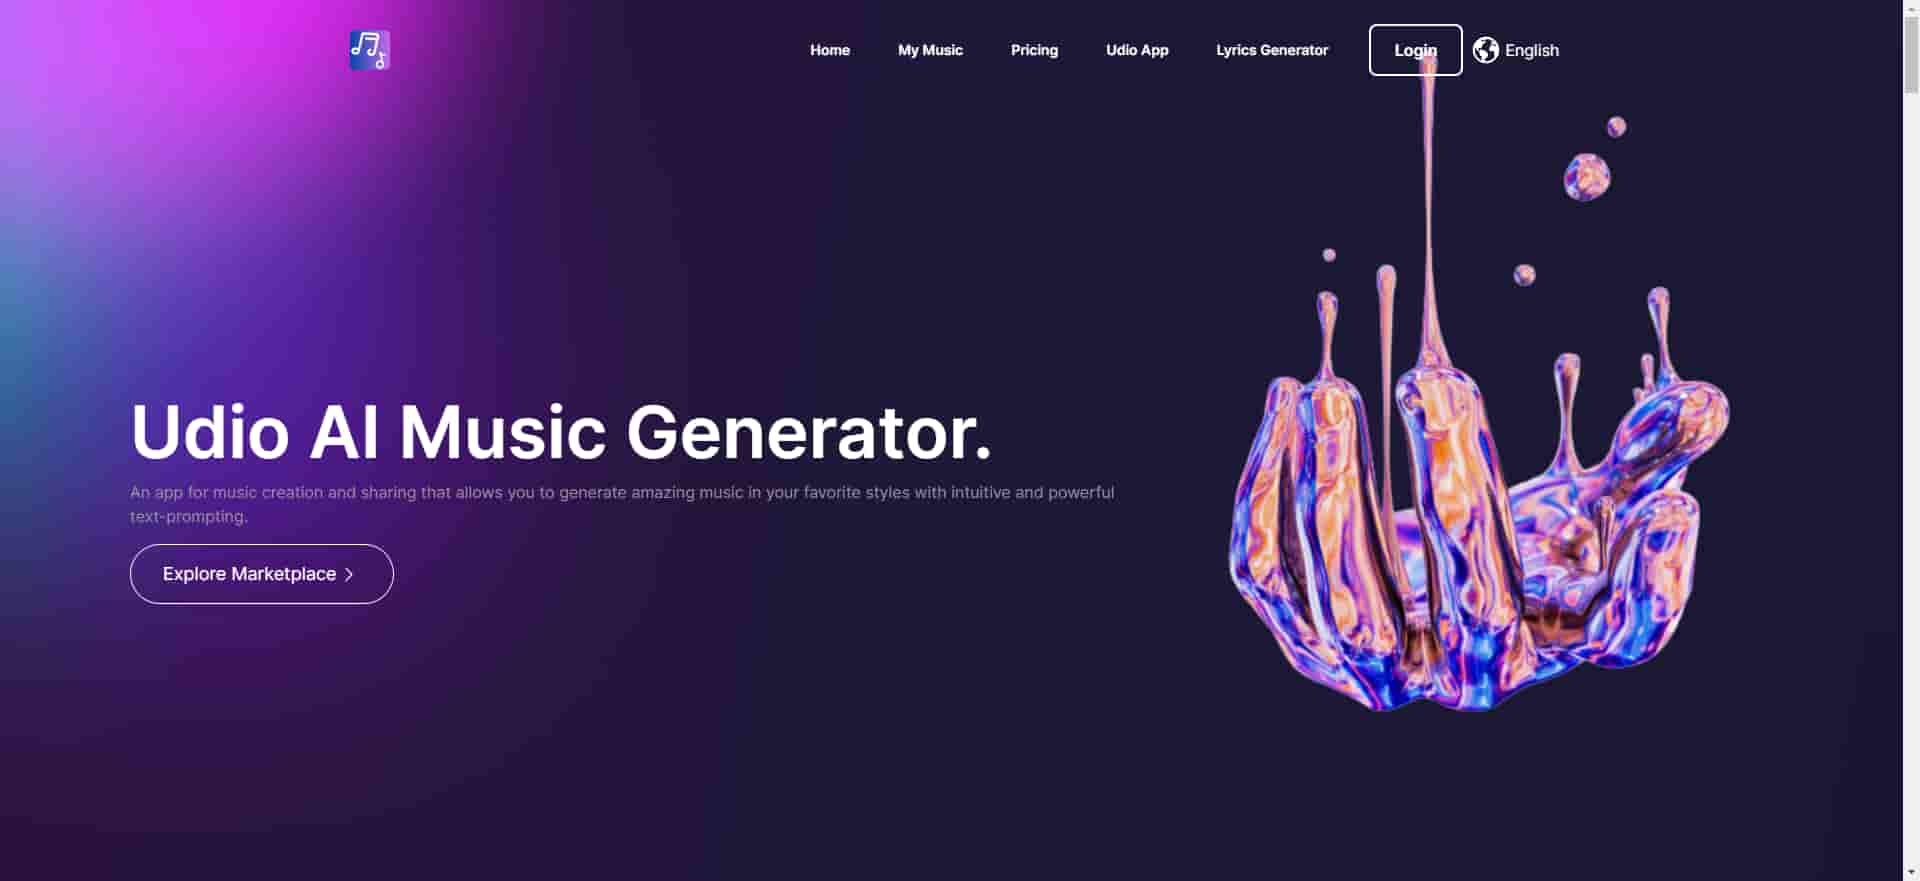 udioai.ai - Udio AI is an AI-powered music generation tool that enables users to create, enhance, and simulate music creation processes